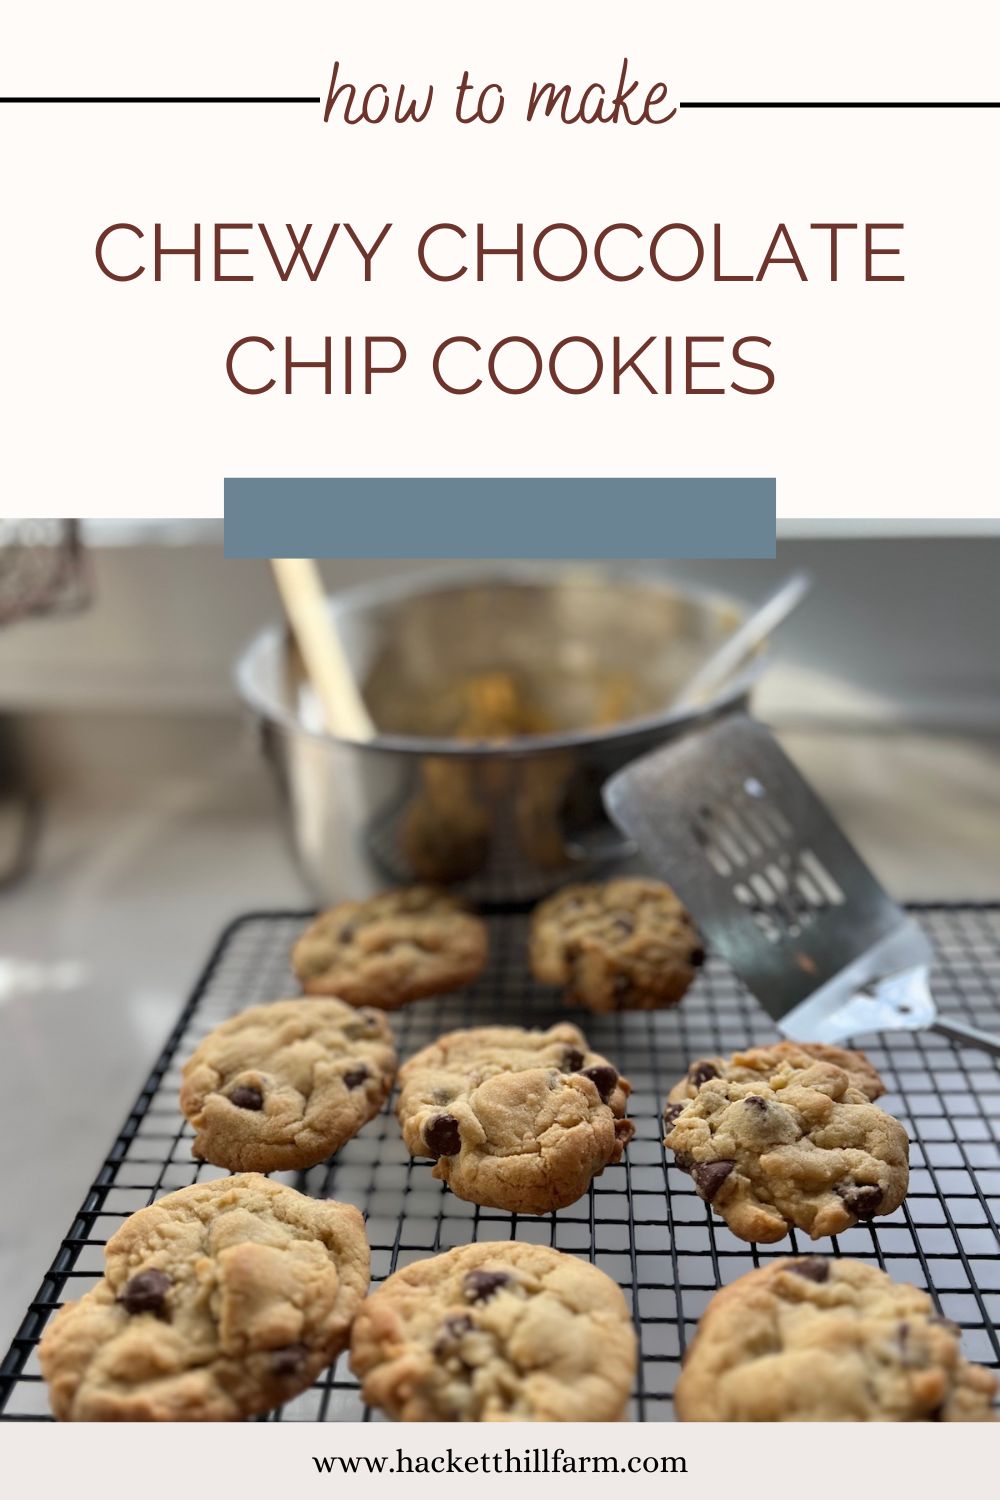 How to Make Chewy Chocolate Chip Cookies | Hackett Hill Farm